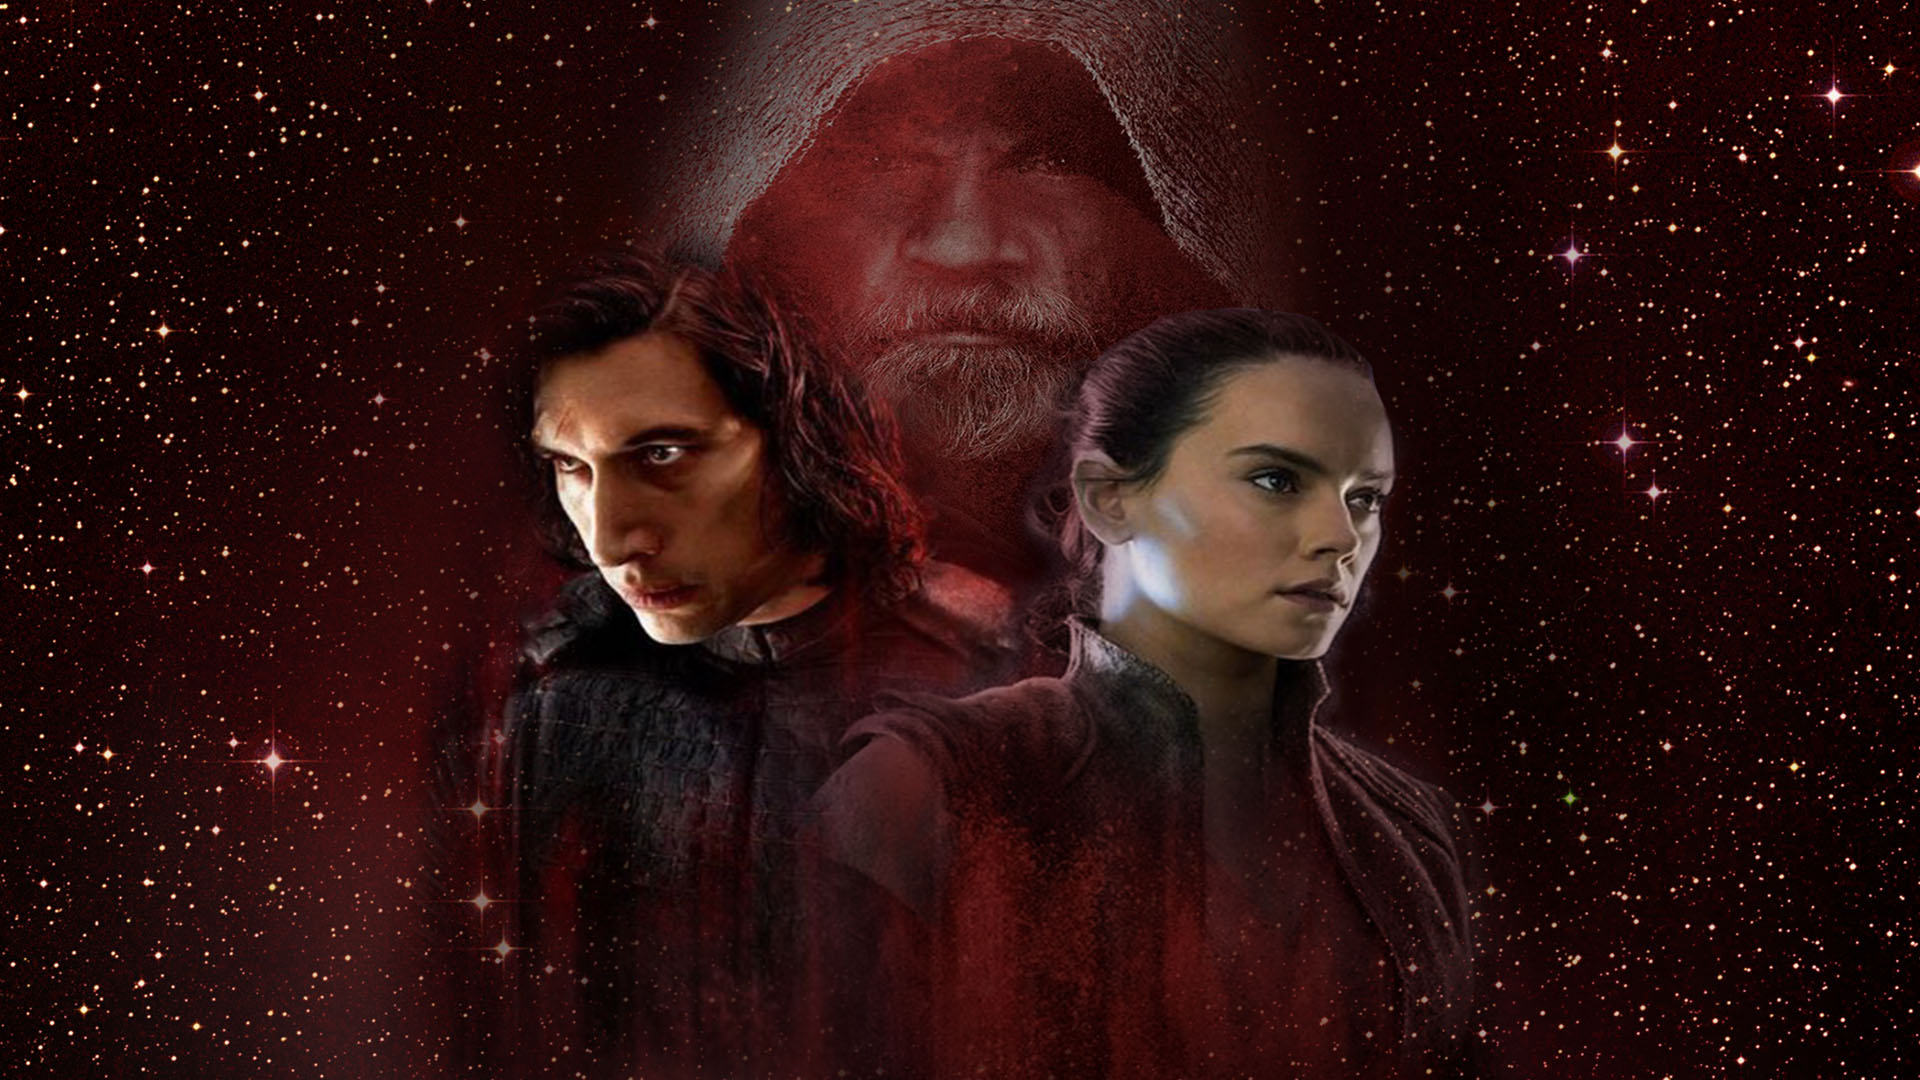 The Last Jedi Characters Wallpaper by Thekingblader995 on DeviantArt